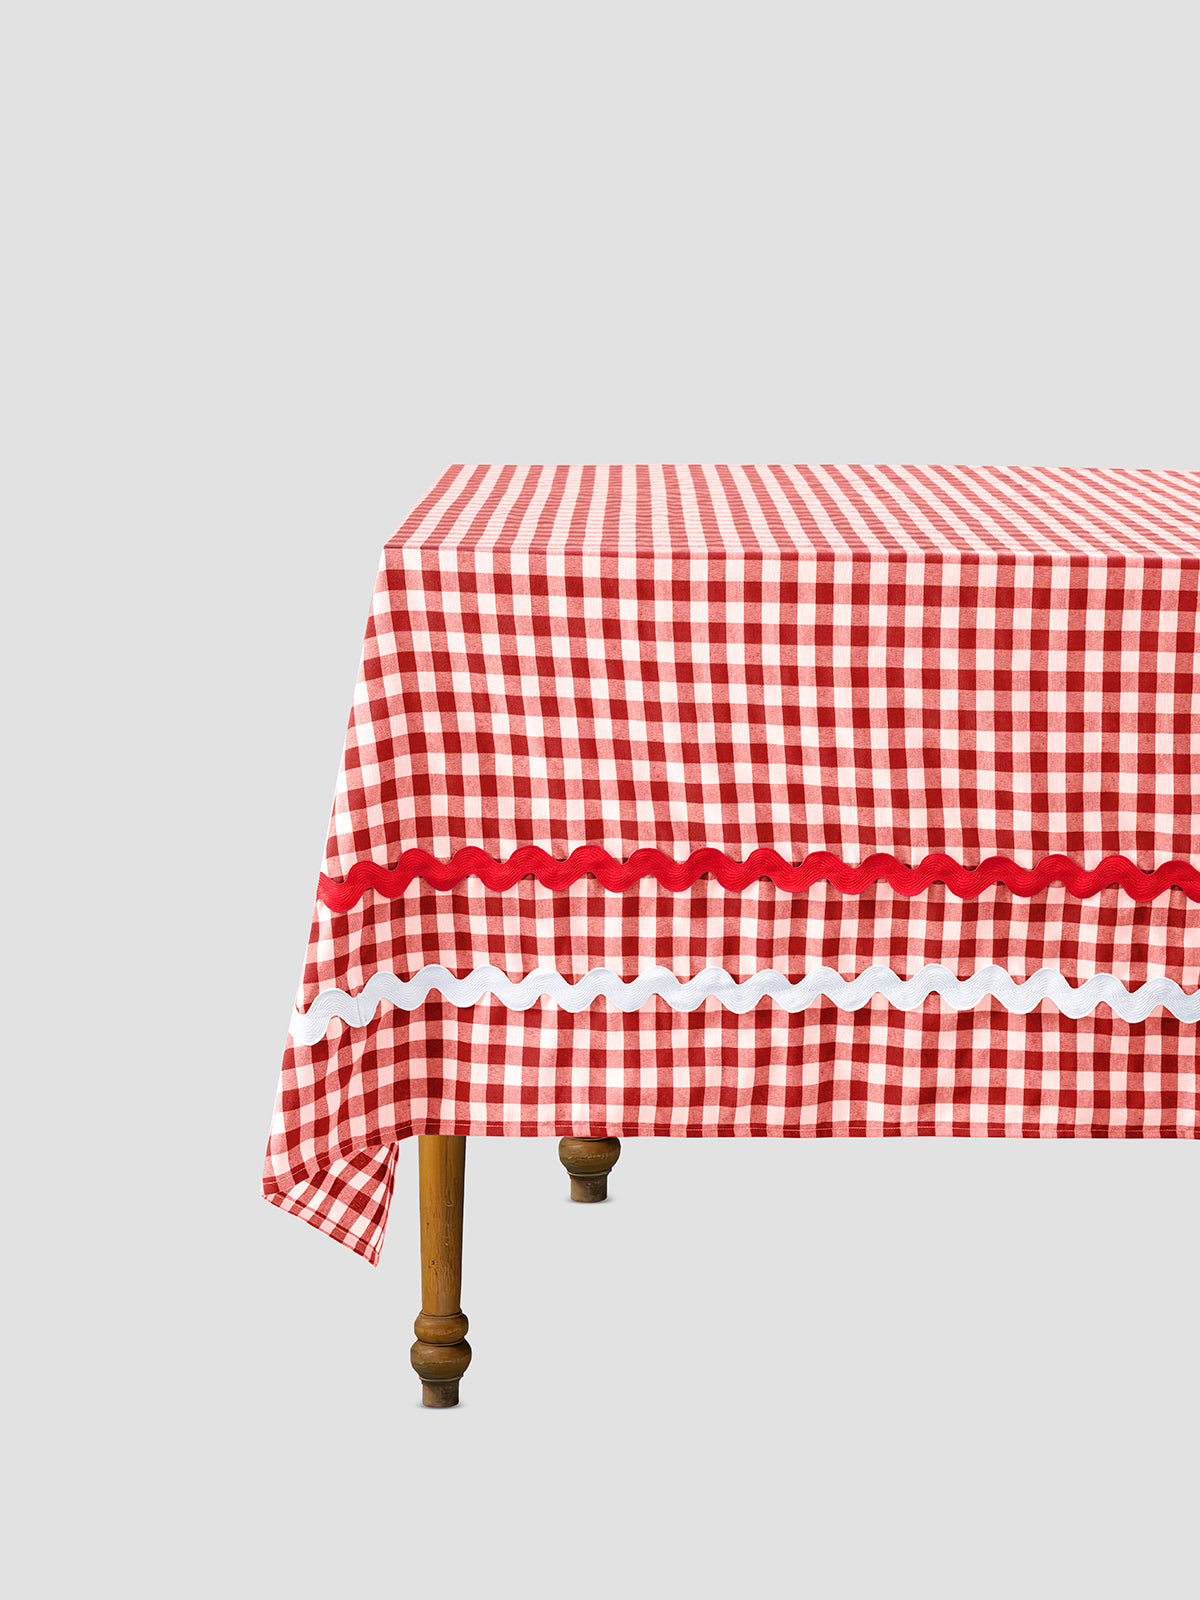 Rectangular tablecloth made of&nbsp;red and white vichy check cotton with&nbsp;white and&nbsp;red trim